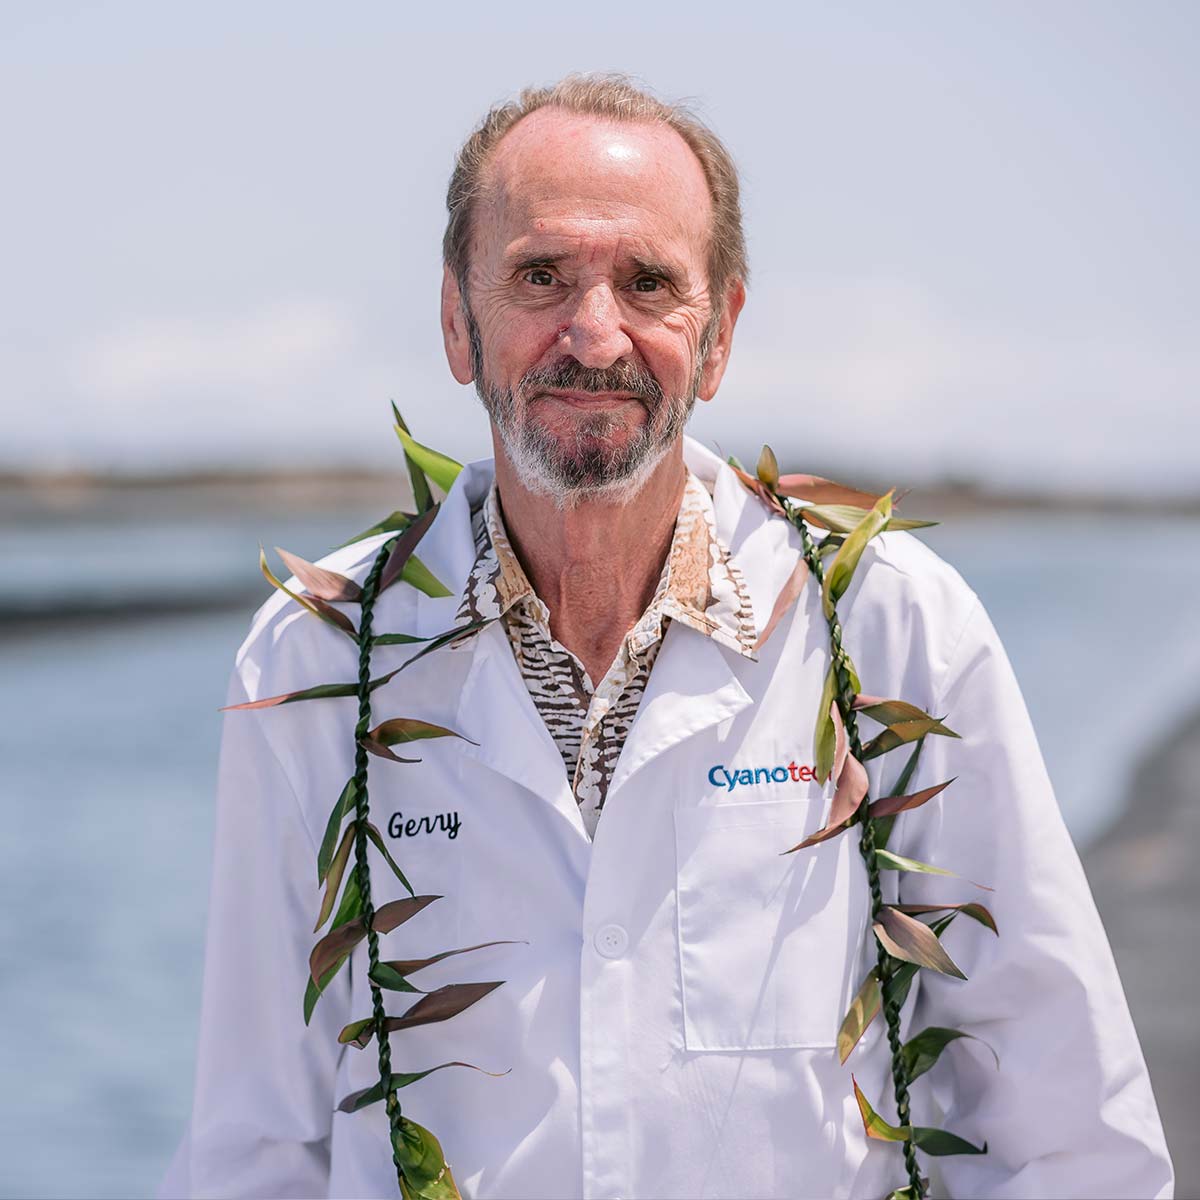 Dr. Gerald R. Cysewski, Founder & CEO of Cyanotech Corporation and Nutrex Hawaii 